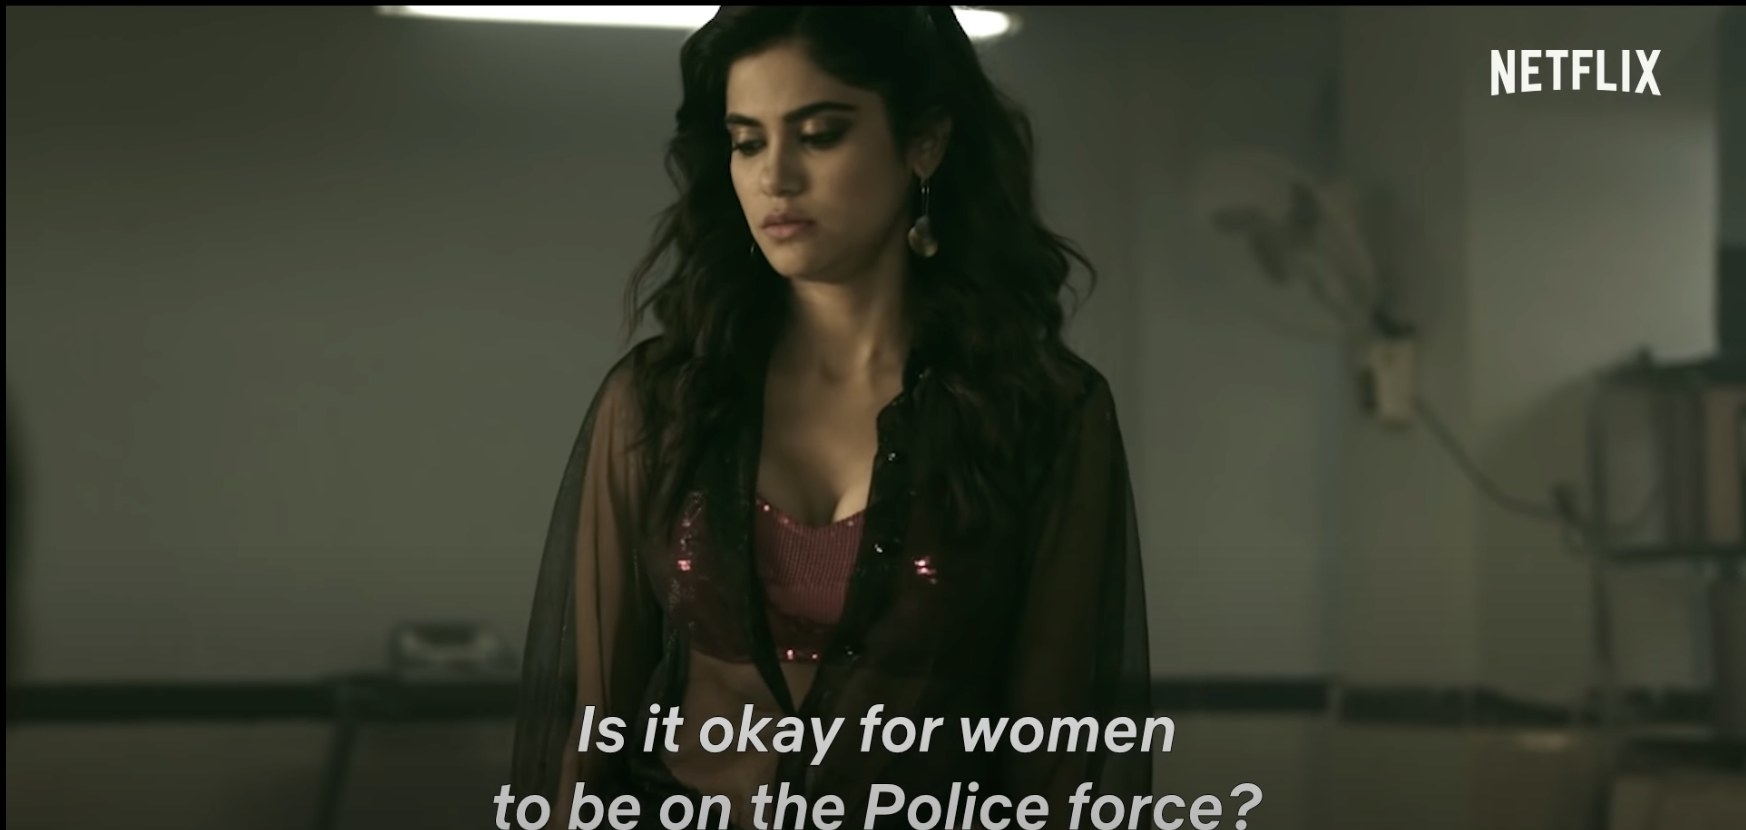 A still from the show where the protagonist asks if it is okay for women to be on the police force